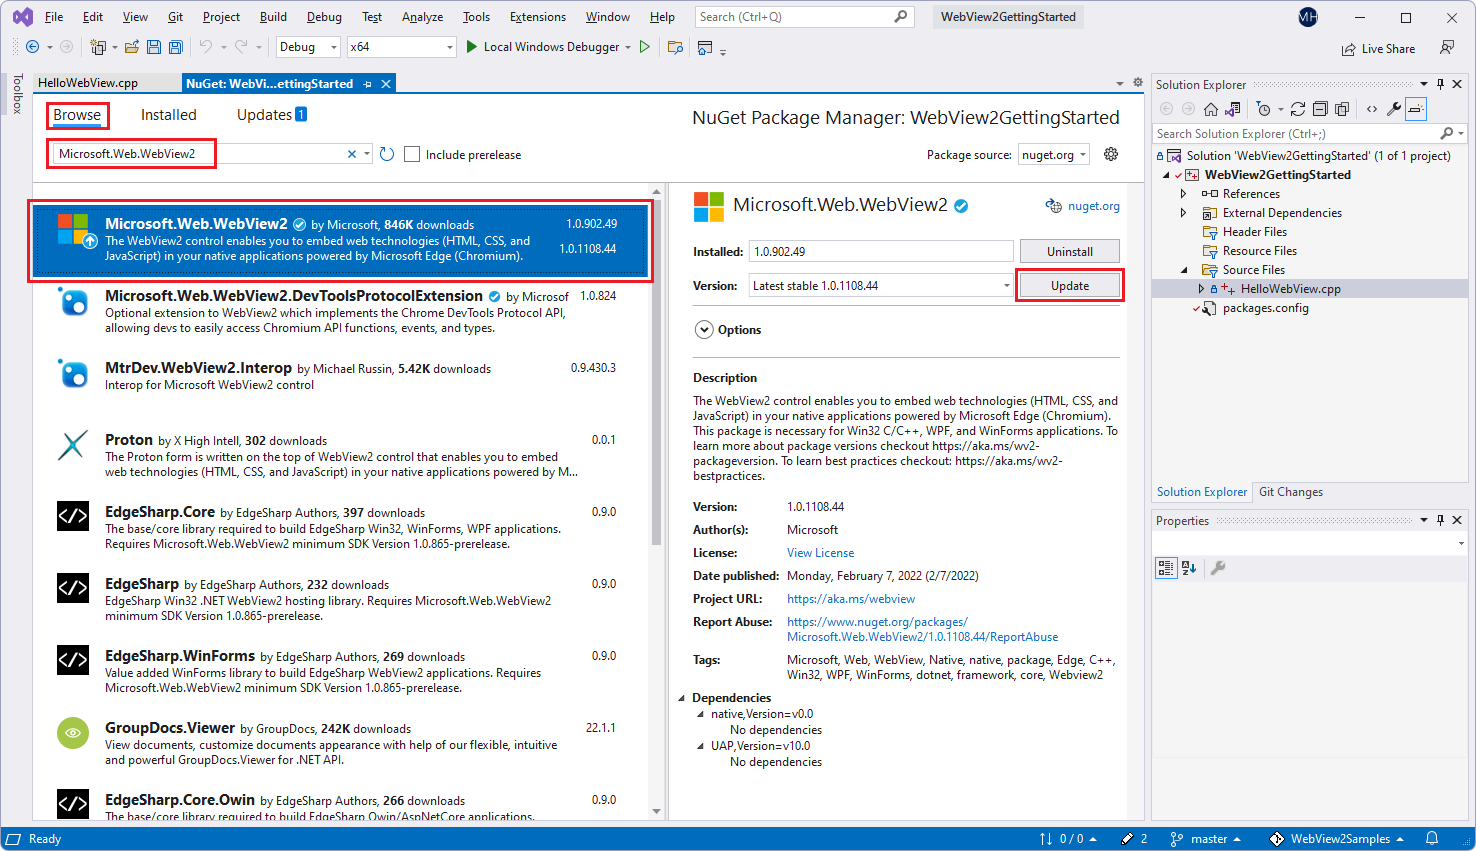 Selecting the 'Microsoft.Web.WebView2' package in NuGet Package Manager in Visual Studio.